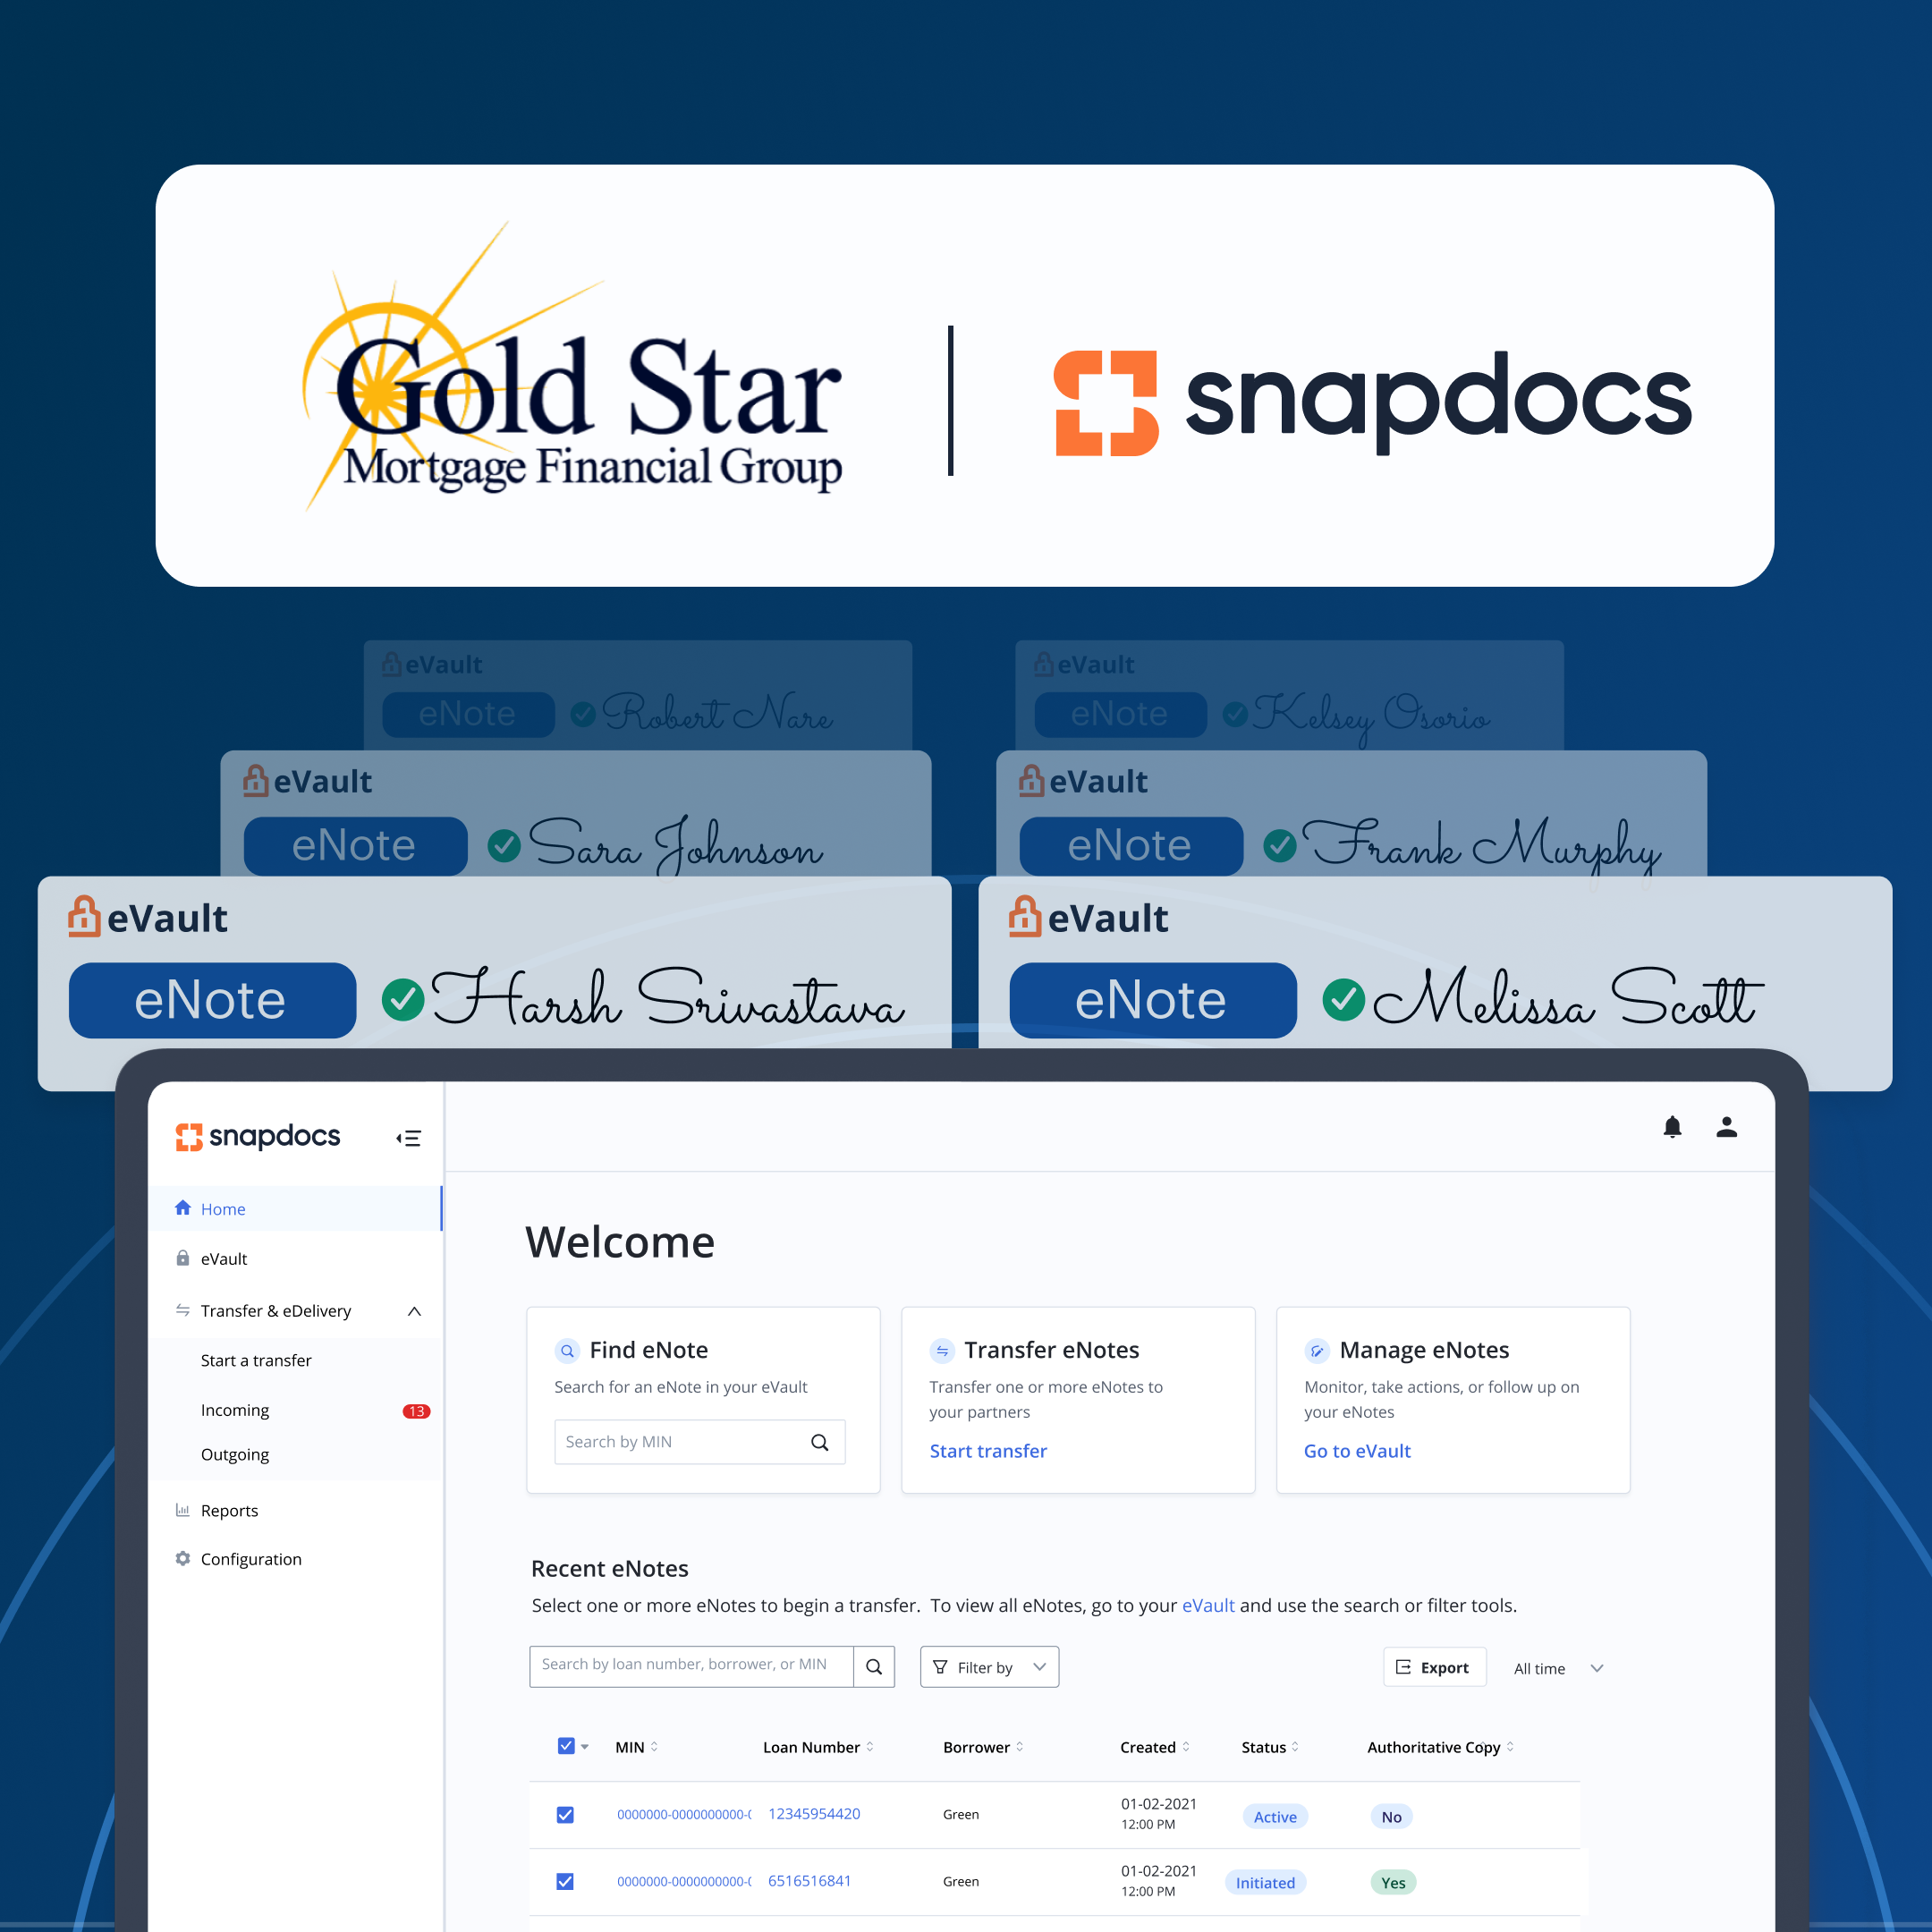 How Gold Star Mortgage Financial Group Reached eNote at Scale with the Snapdocs eVault